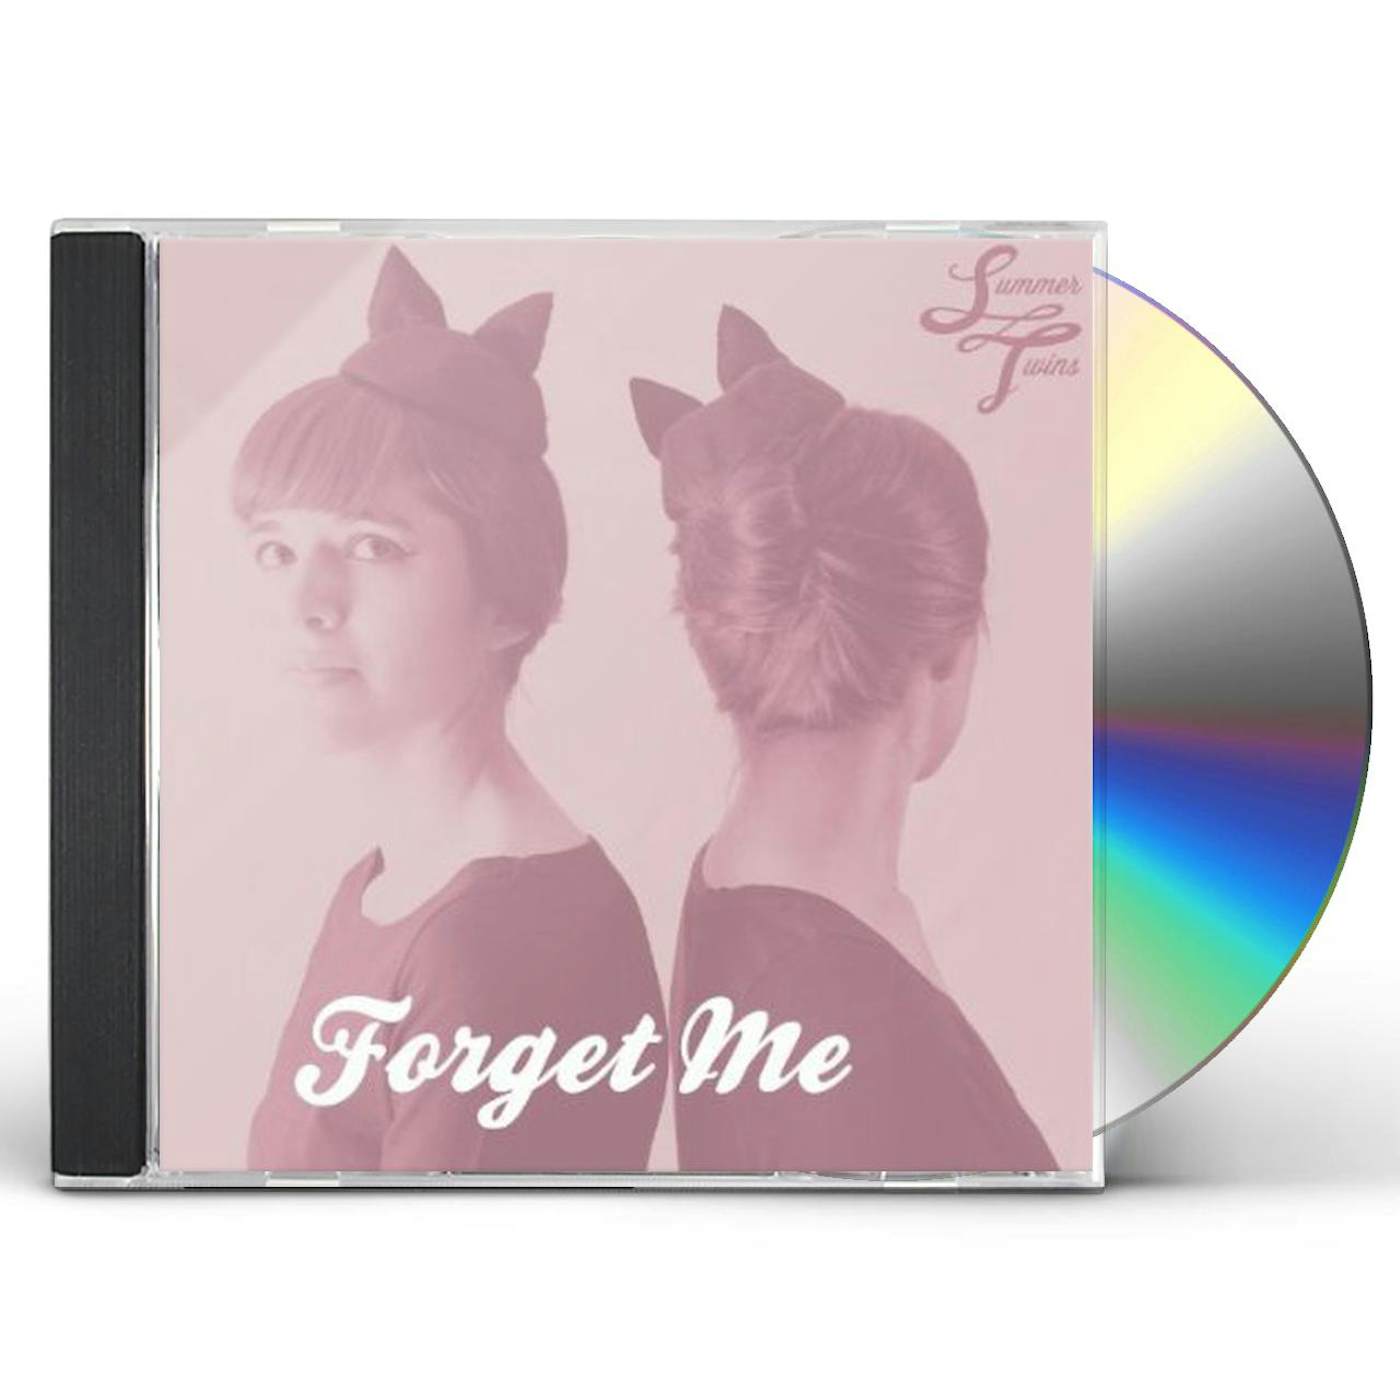 Summer Twins FORGET ME CD